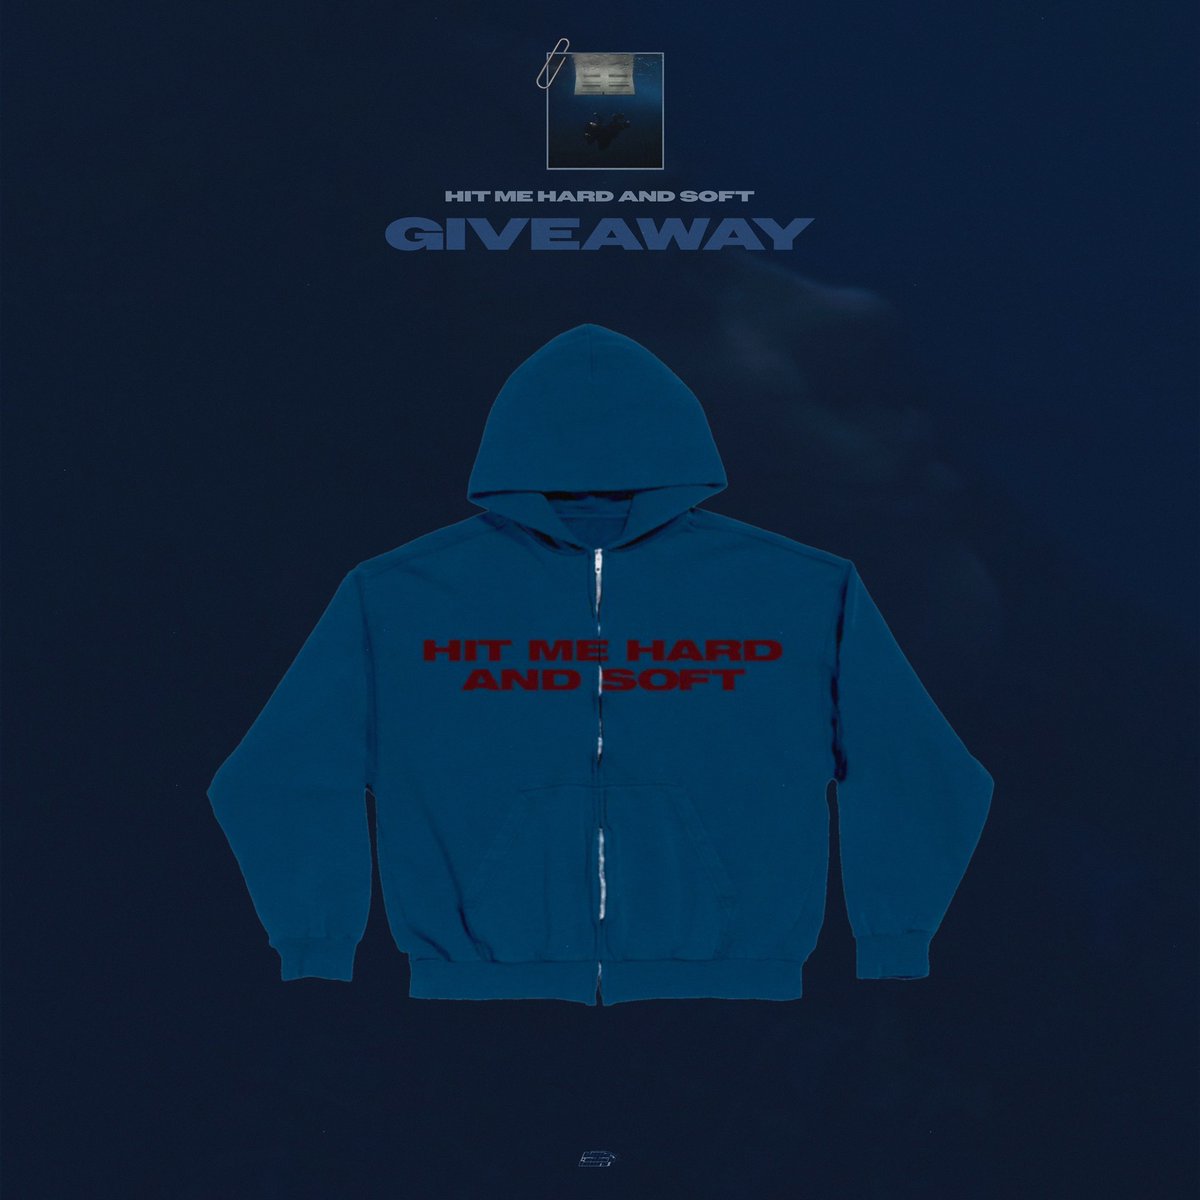 #HITMEHARDANDSOFT: GIVEAWAY TIME! ⭐️ We're giving away one 'BLUE & RED Zip Hoodie' to one lucky winner! 💙 For a chance to win, all you have to do is: • ⁠Purchase one of the digital versions of the album, download the files and send us a screenshot! • ⁠Repost this post!